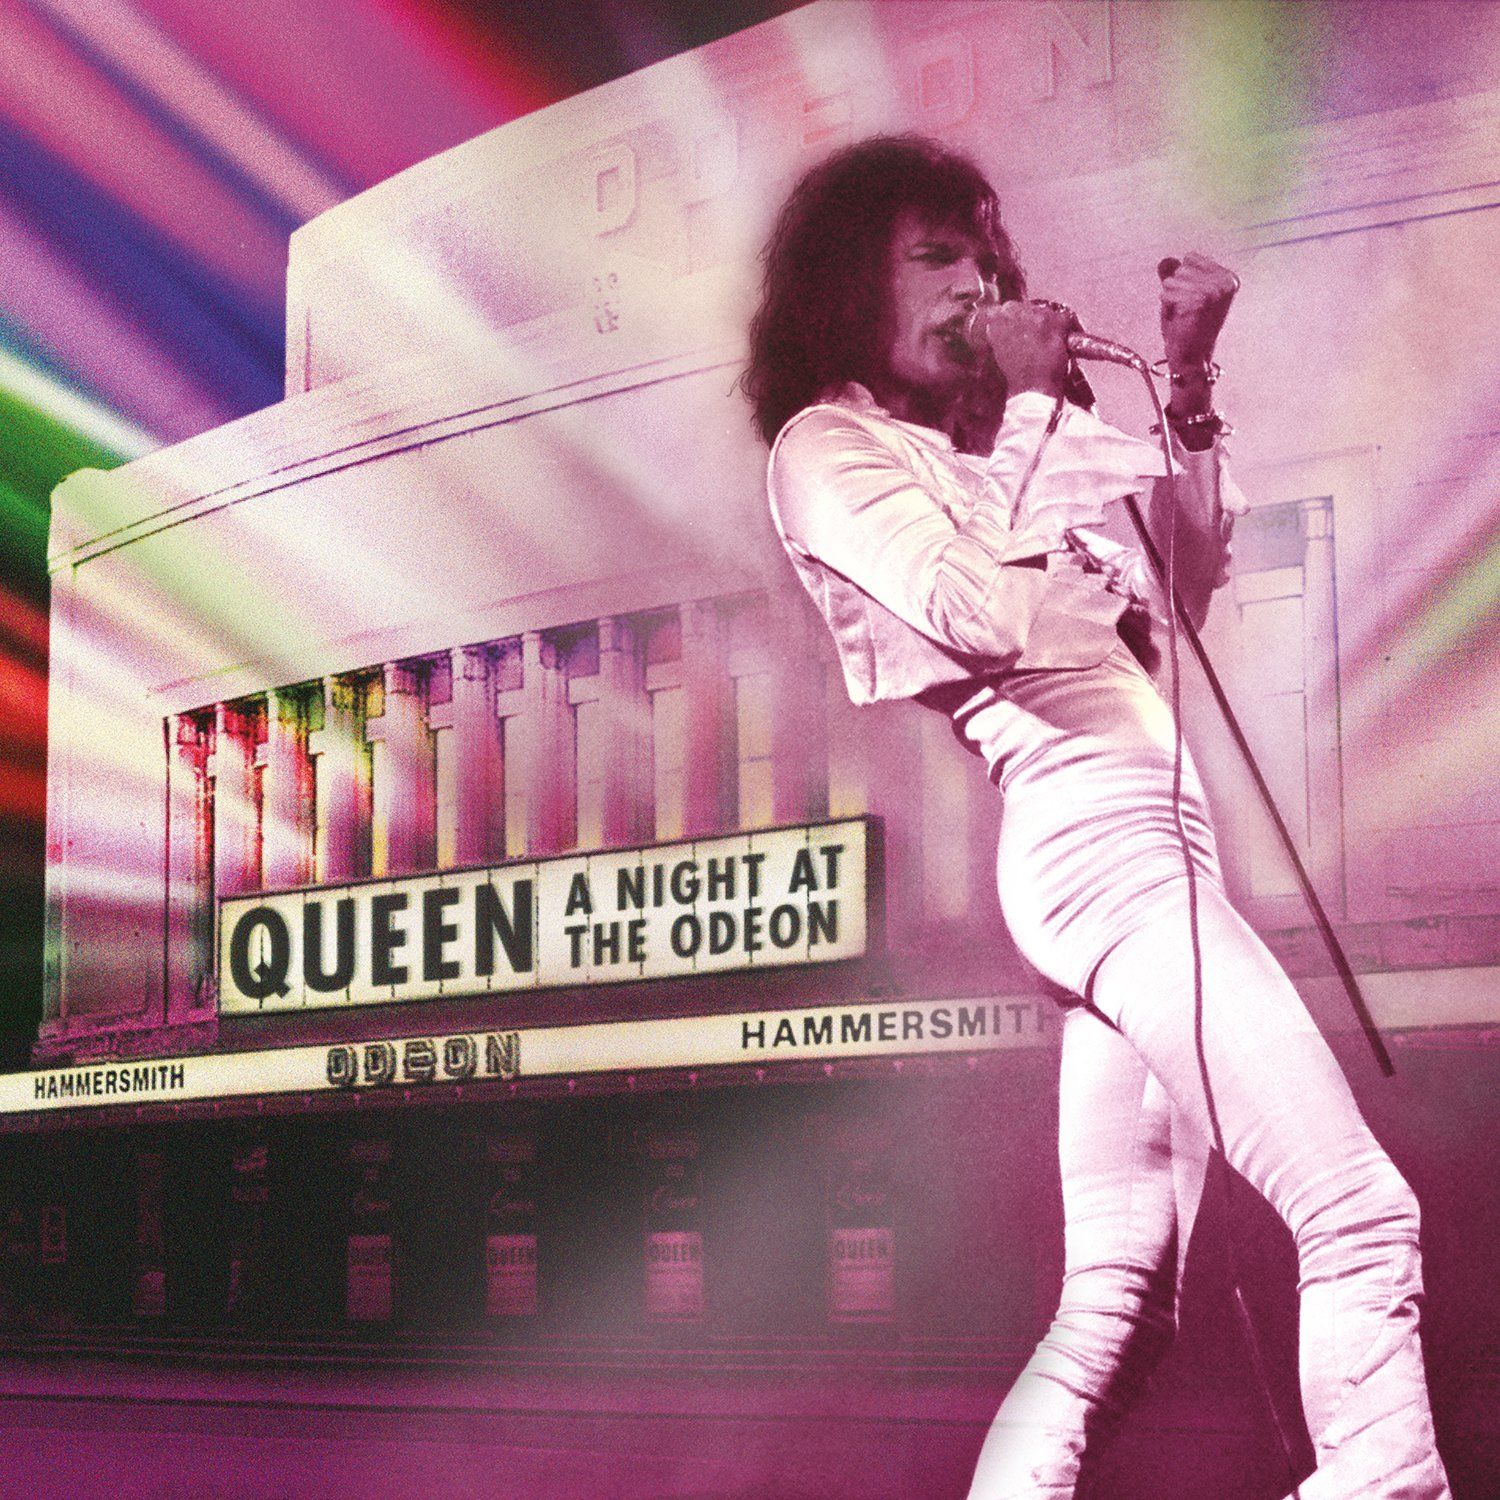 Queen - A Night At The Odeon - Hammersmith 1975 (CD)